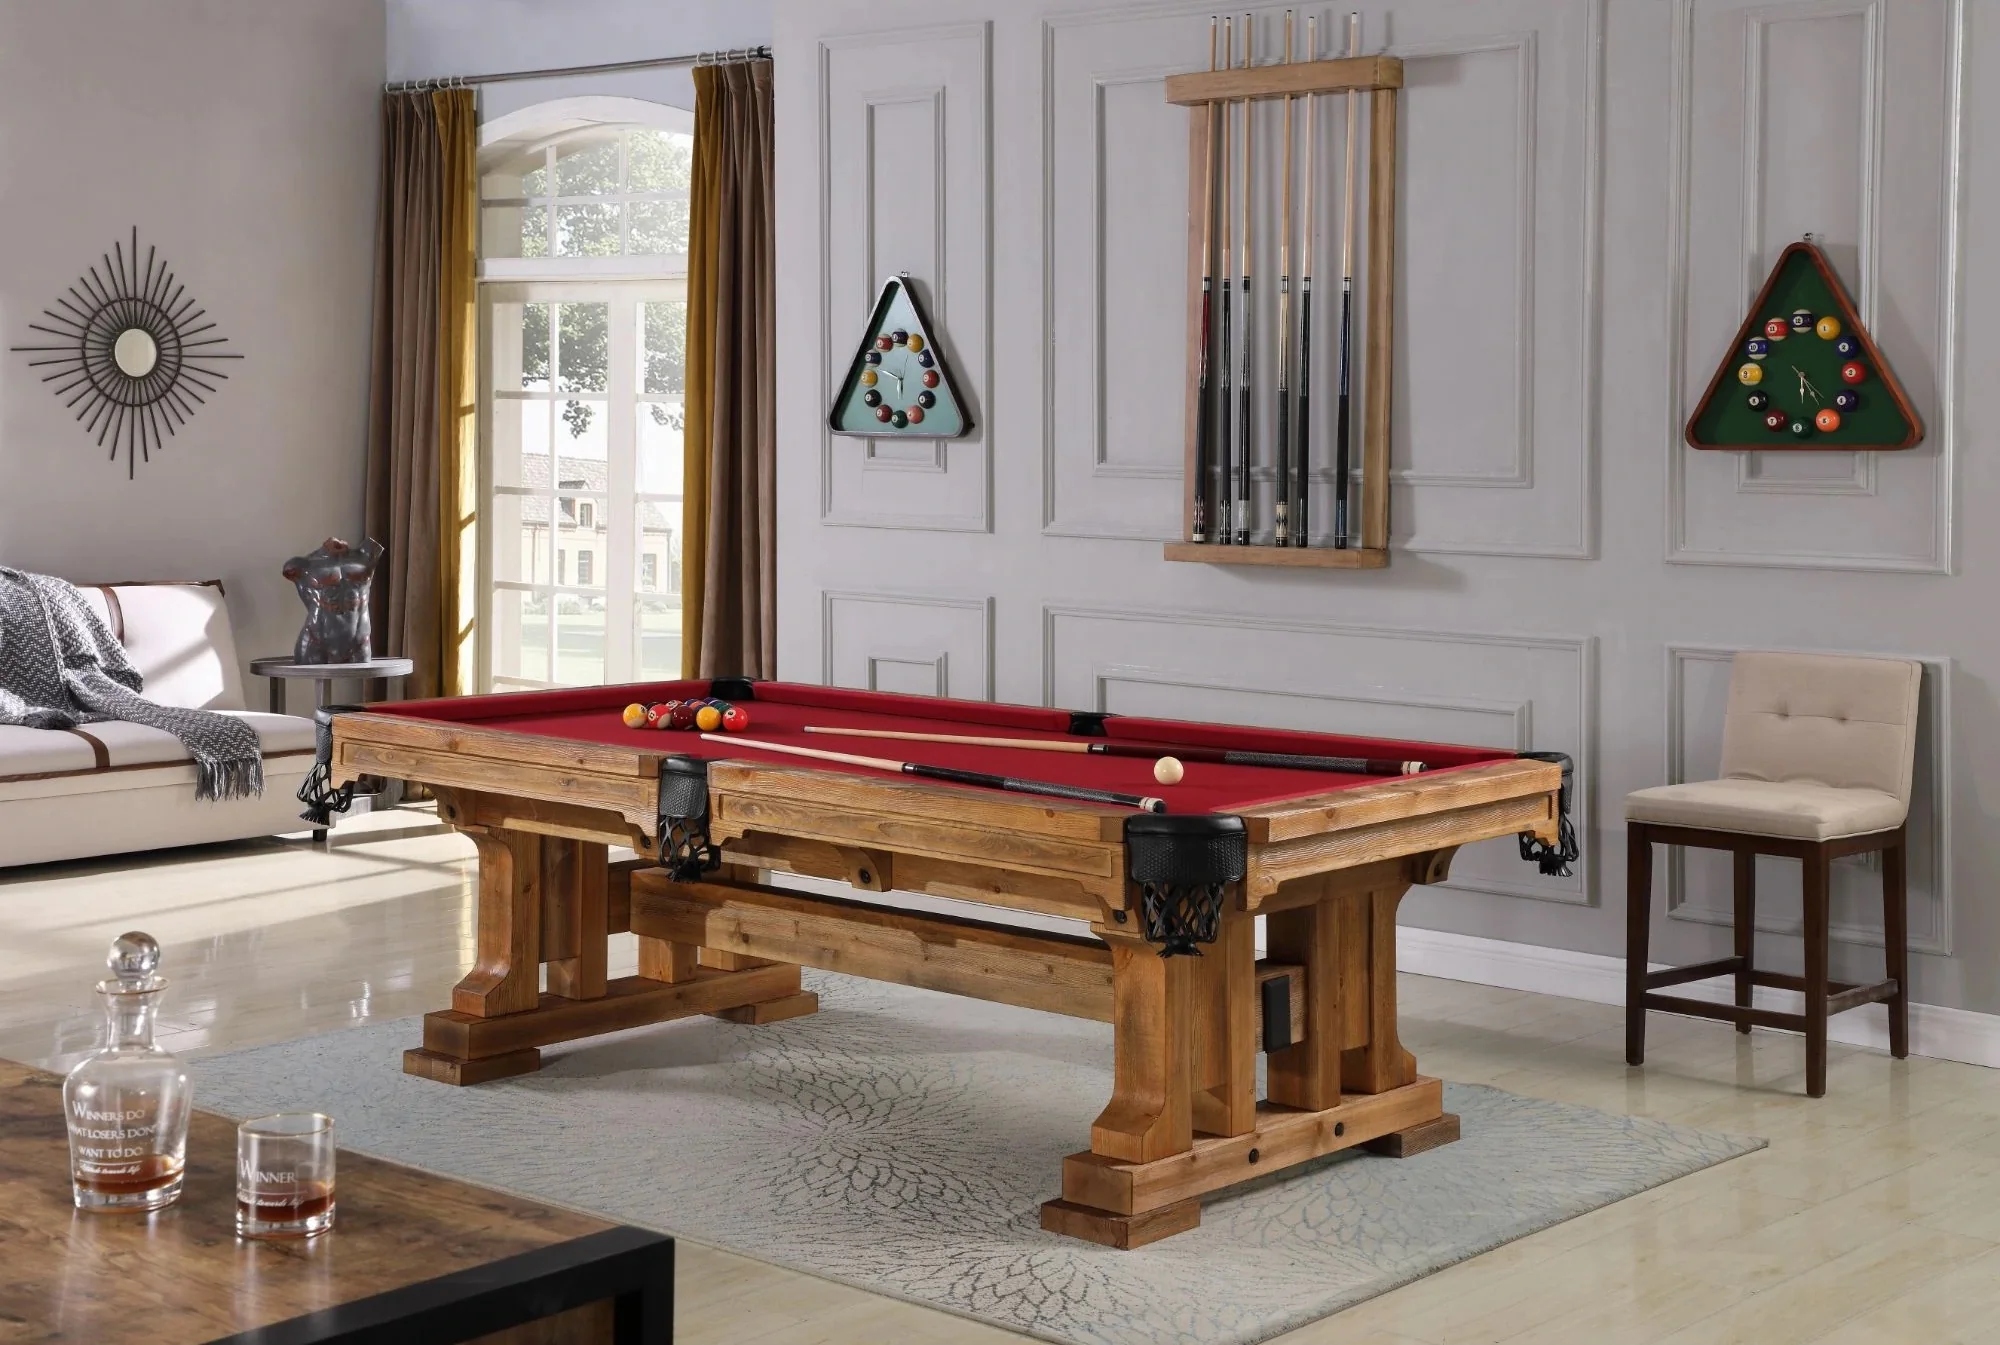 Playcraft Colorado Slate Pool Table With Optional Dining Top in a room